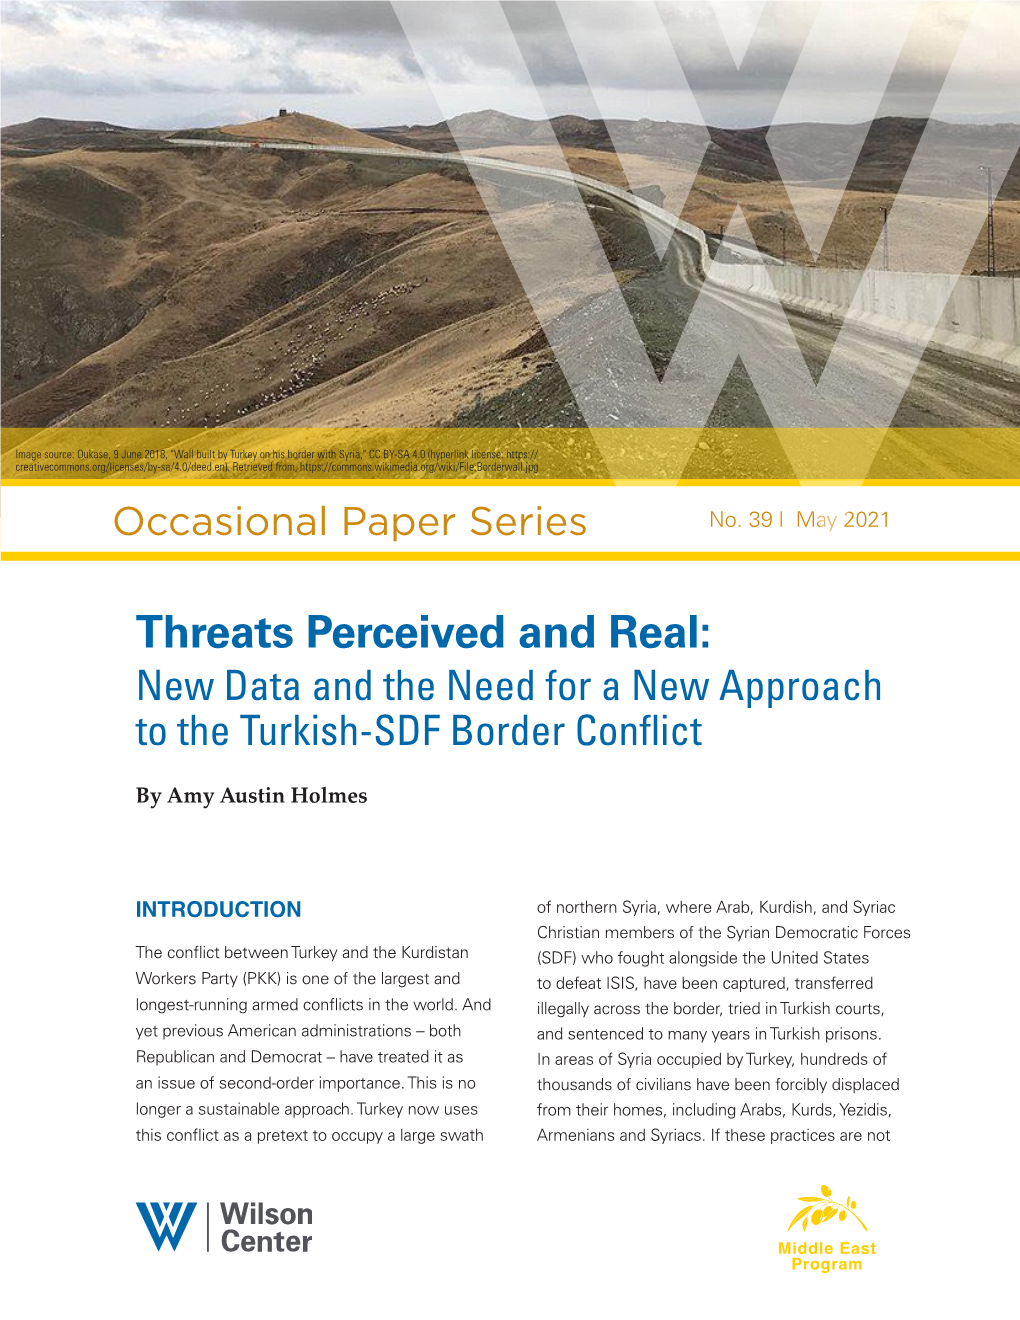 Threats Perceived and Real: New Data and the Need for a New Approach to the Turkish-SDF Border Conflict